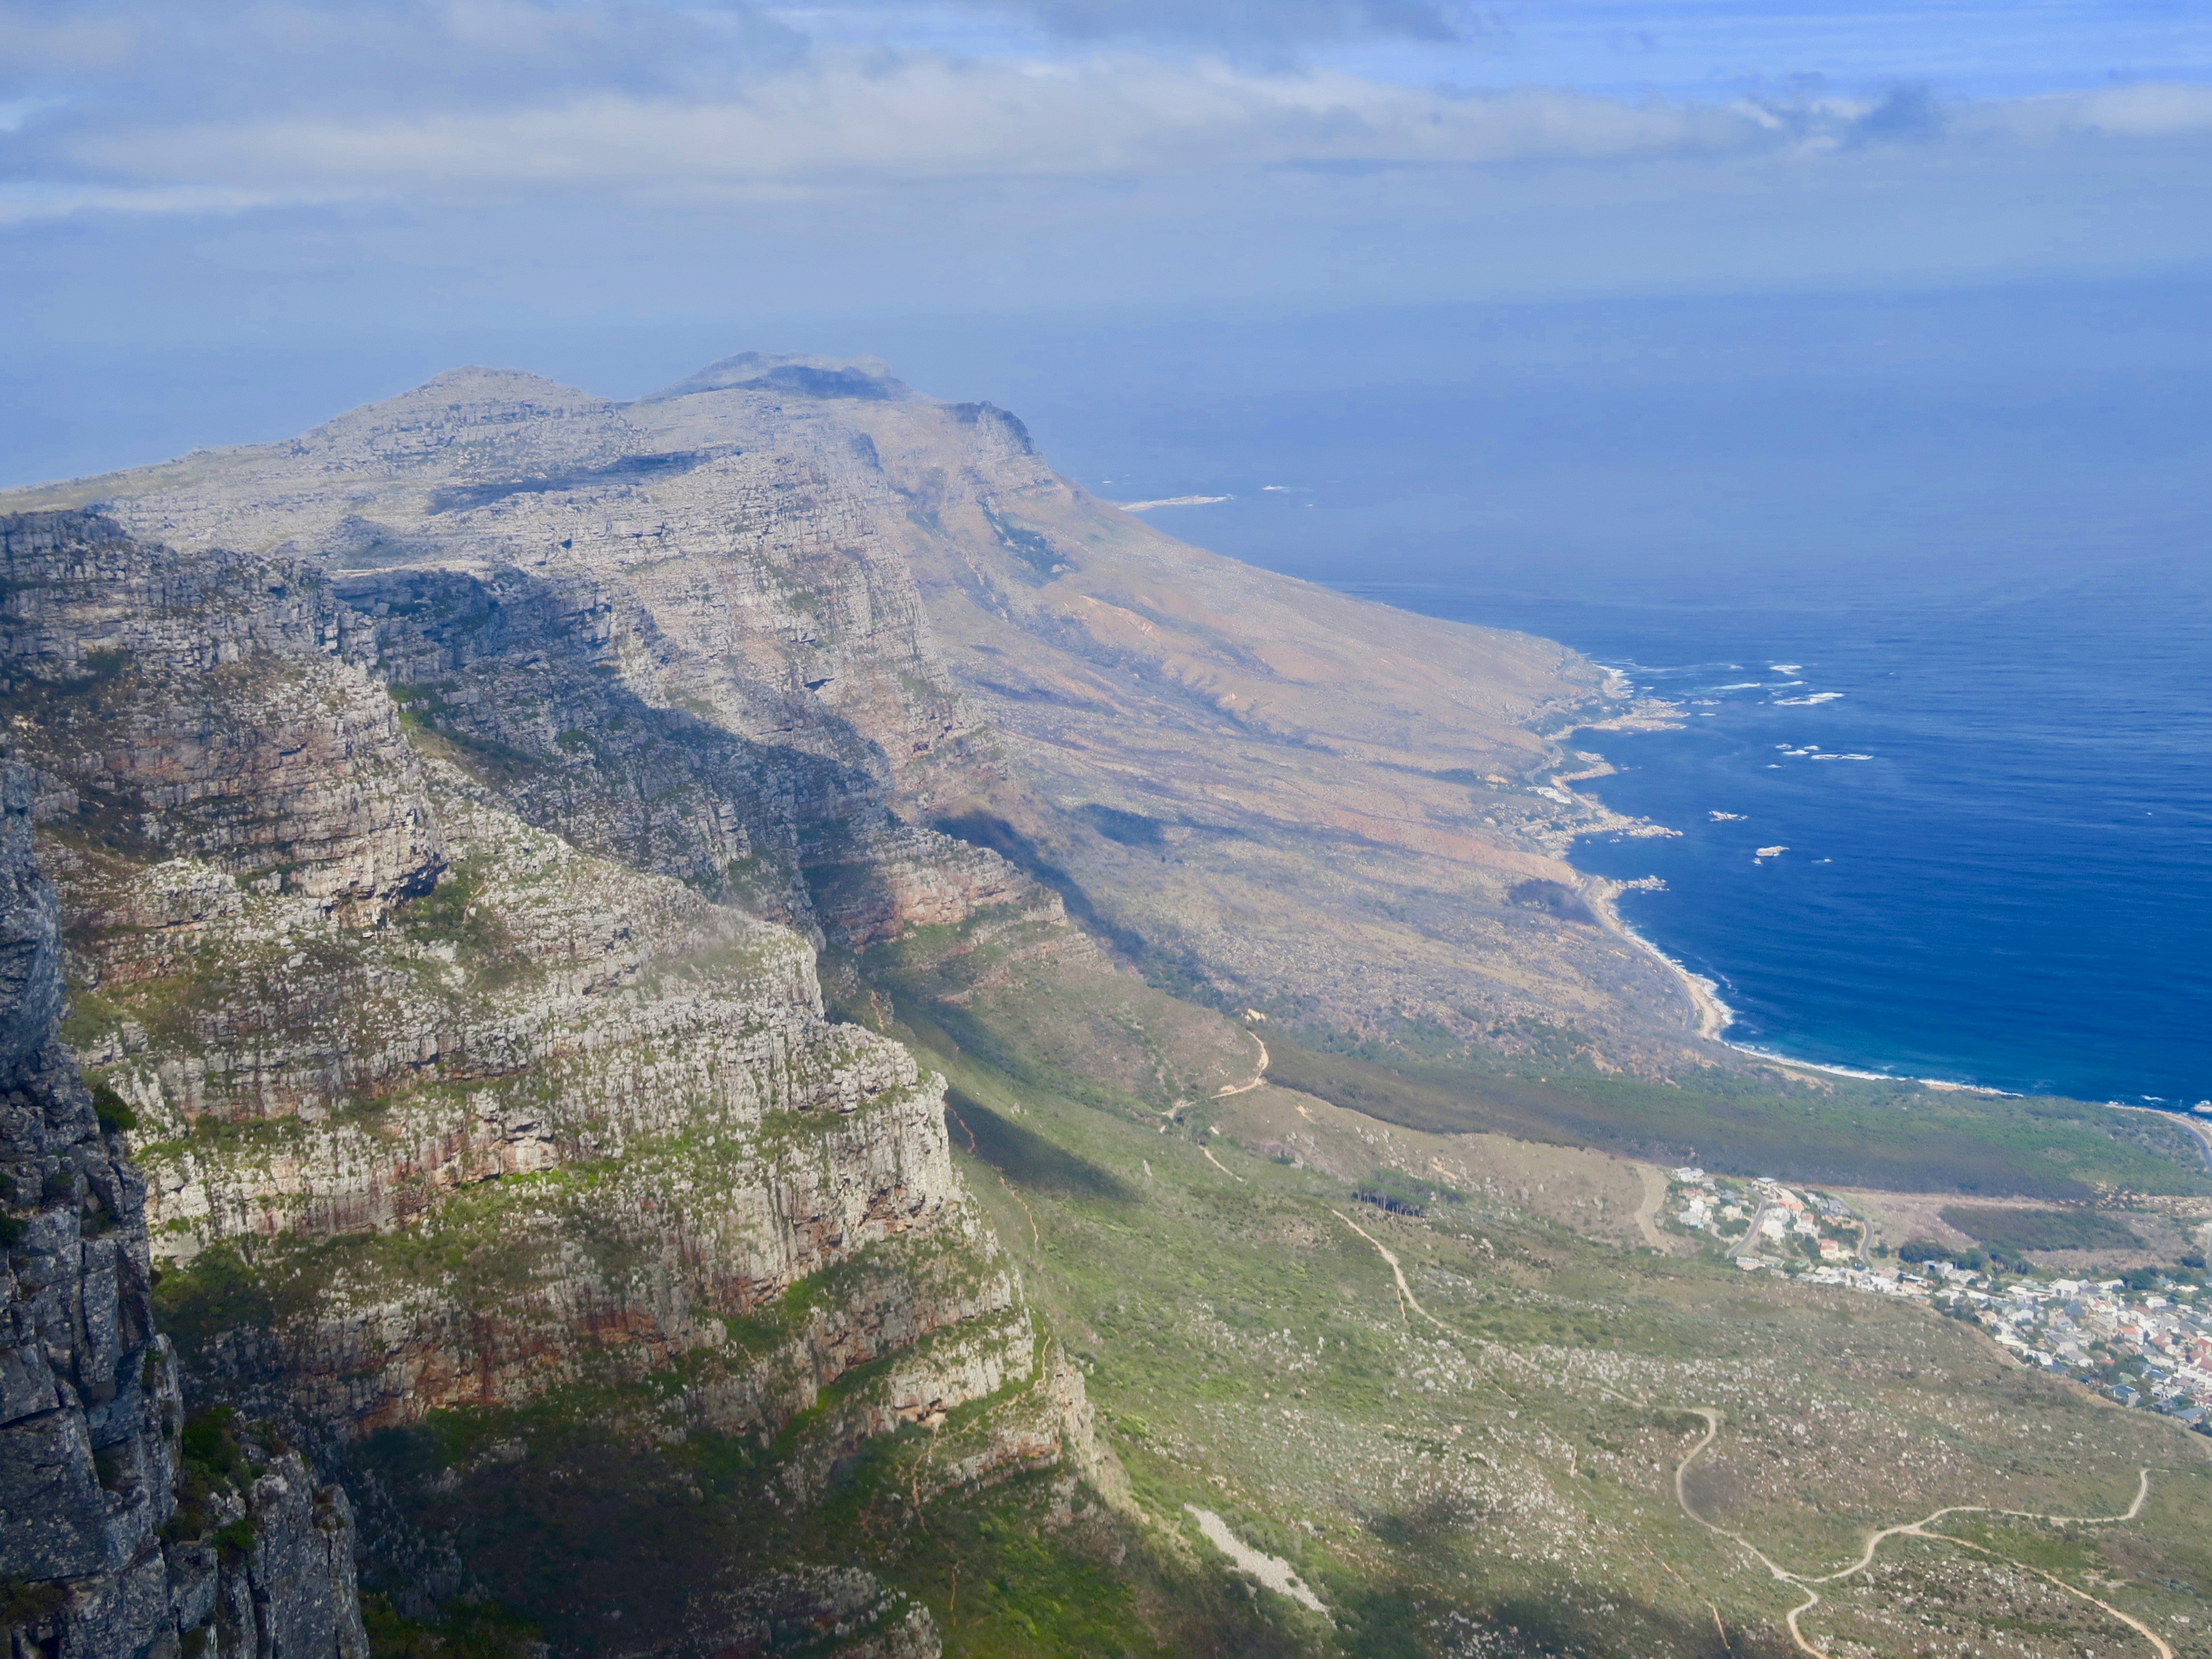 The 12 Apostles from Table Mountain